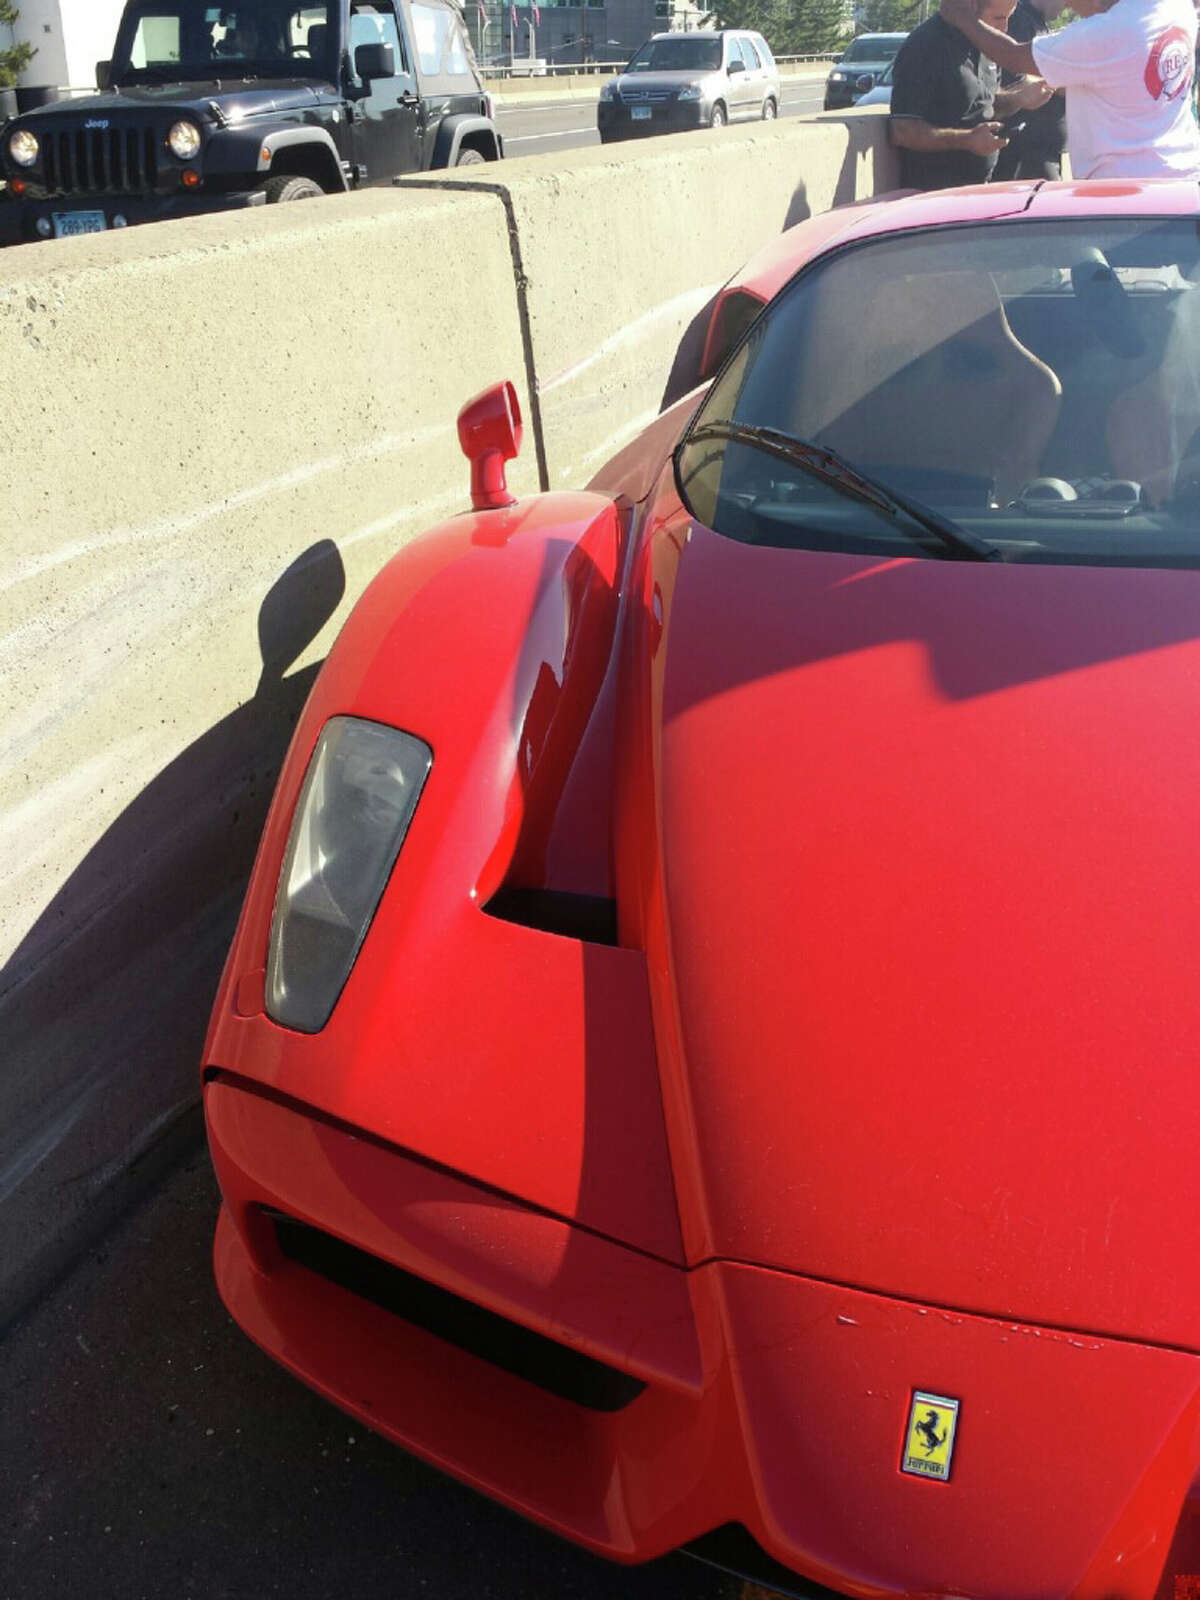 A New York man driving a rare Ferrari Enzo owned by a Cuban-born multi-millionaire lost control of the $600,000-plus car while getting onto Interstate-95 at Exit 7 in Stamford Monday, June 23, 2014.